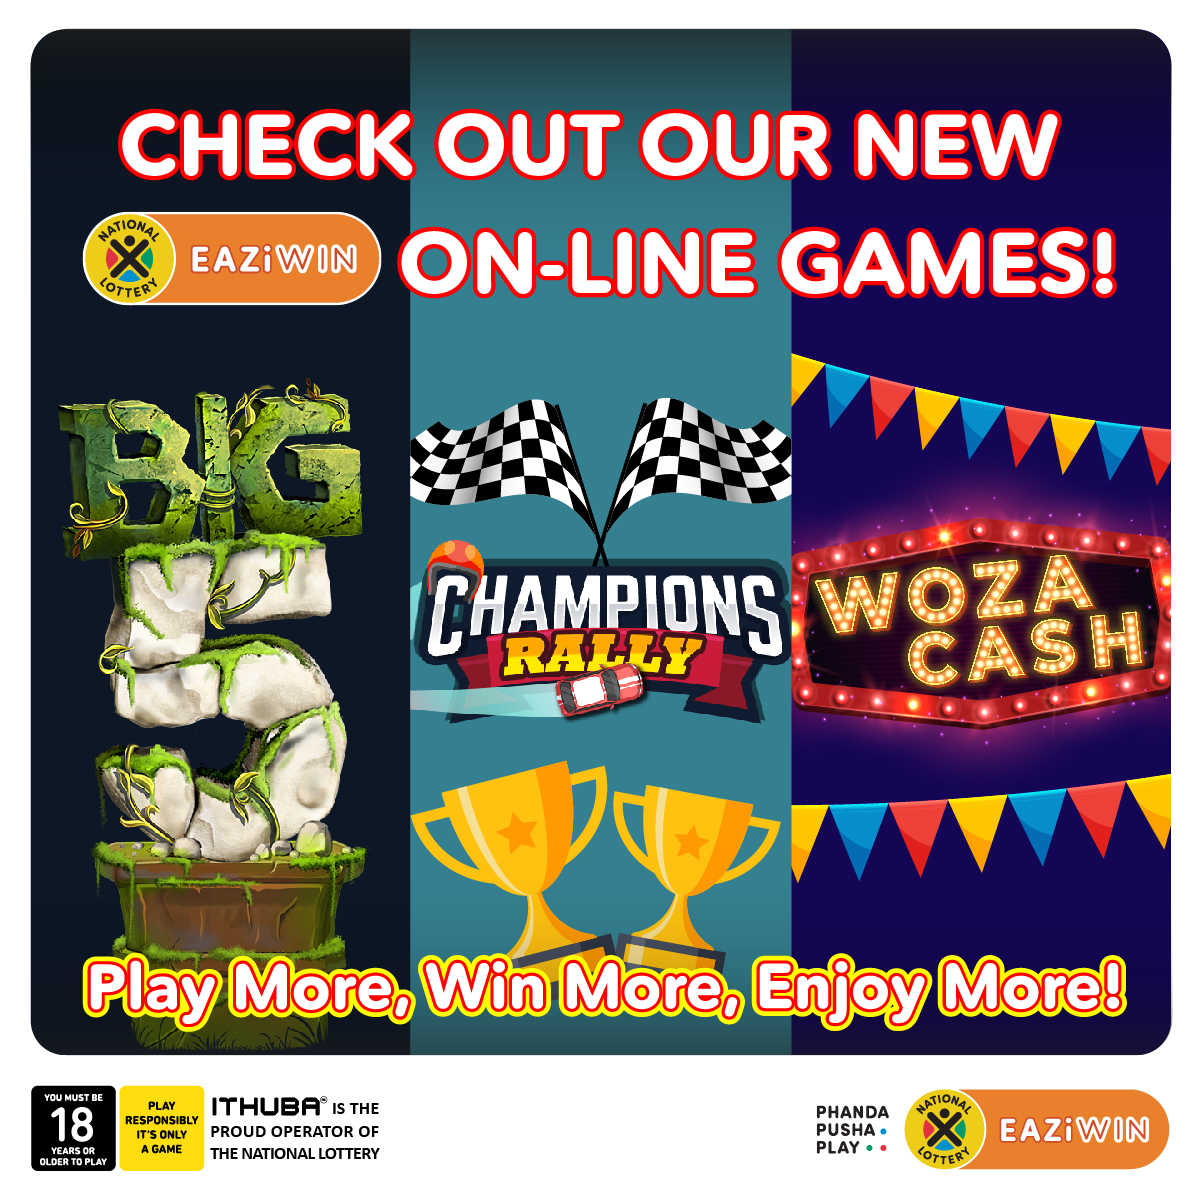 Play More, Win More, Enjoy More! The National Lottery brings you 3 NEW games on #EAZiWIN for your chance to WIN your share of R4,9 MILLION. PLAY #BIG5, #CHAMPIONSRALLY & #WOZACASH! Log into nationallottery.co.za, or the Mobile App to play. PLAY NOW!!! Ts &Cs Apply.